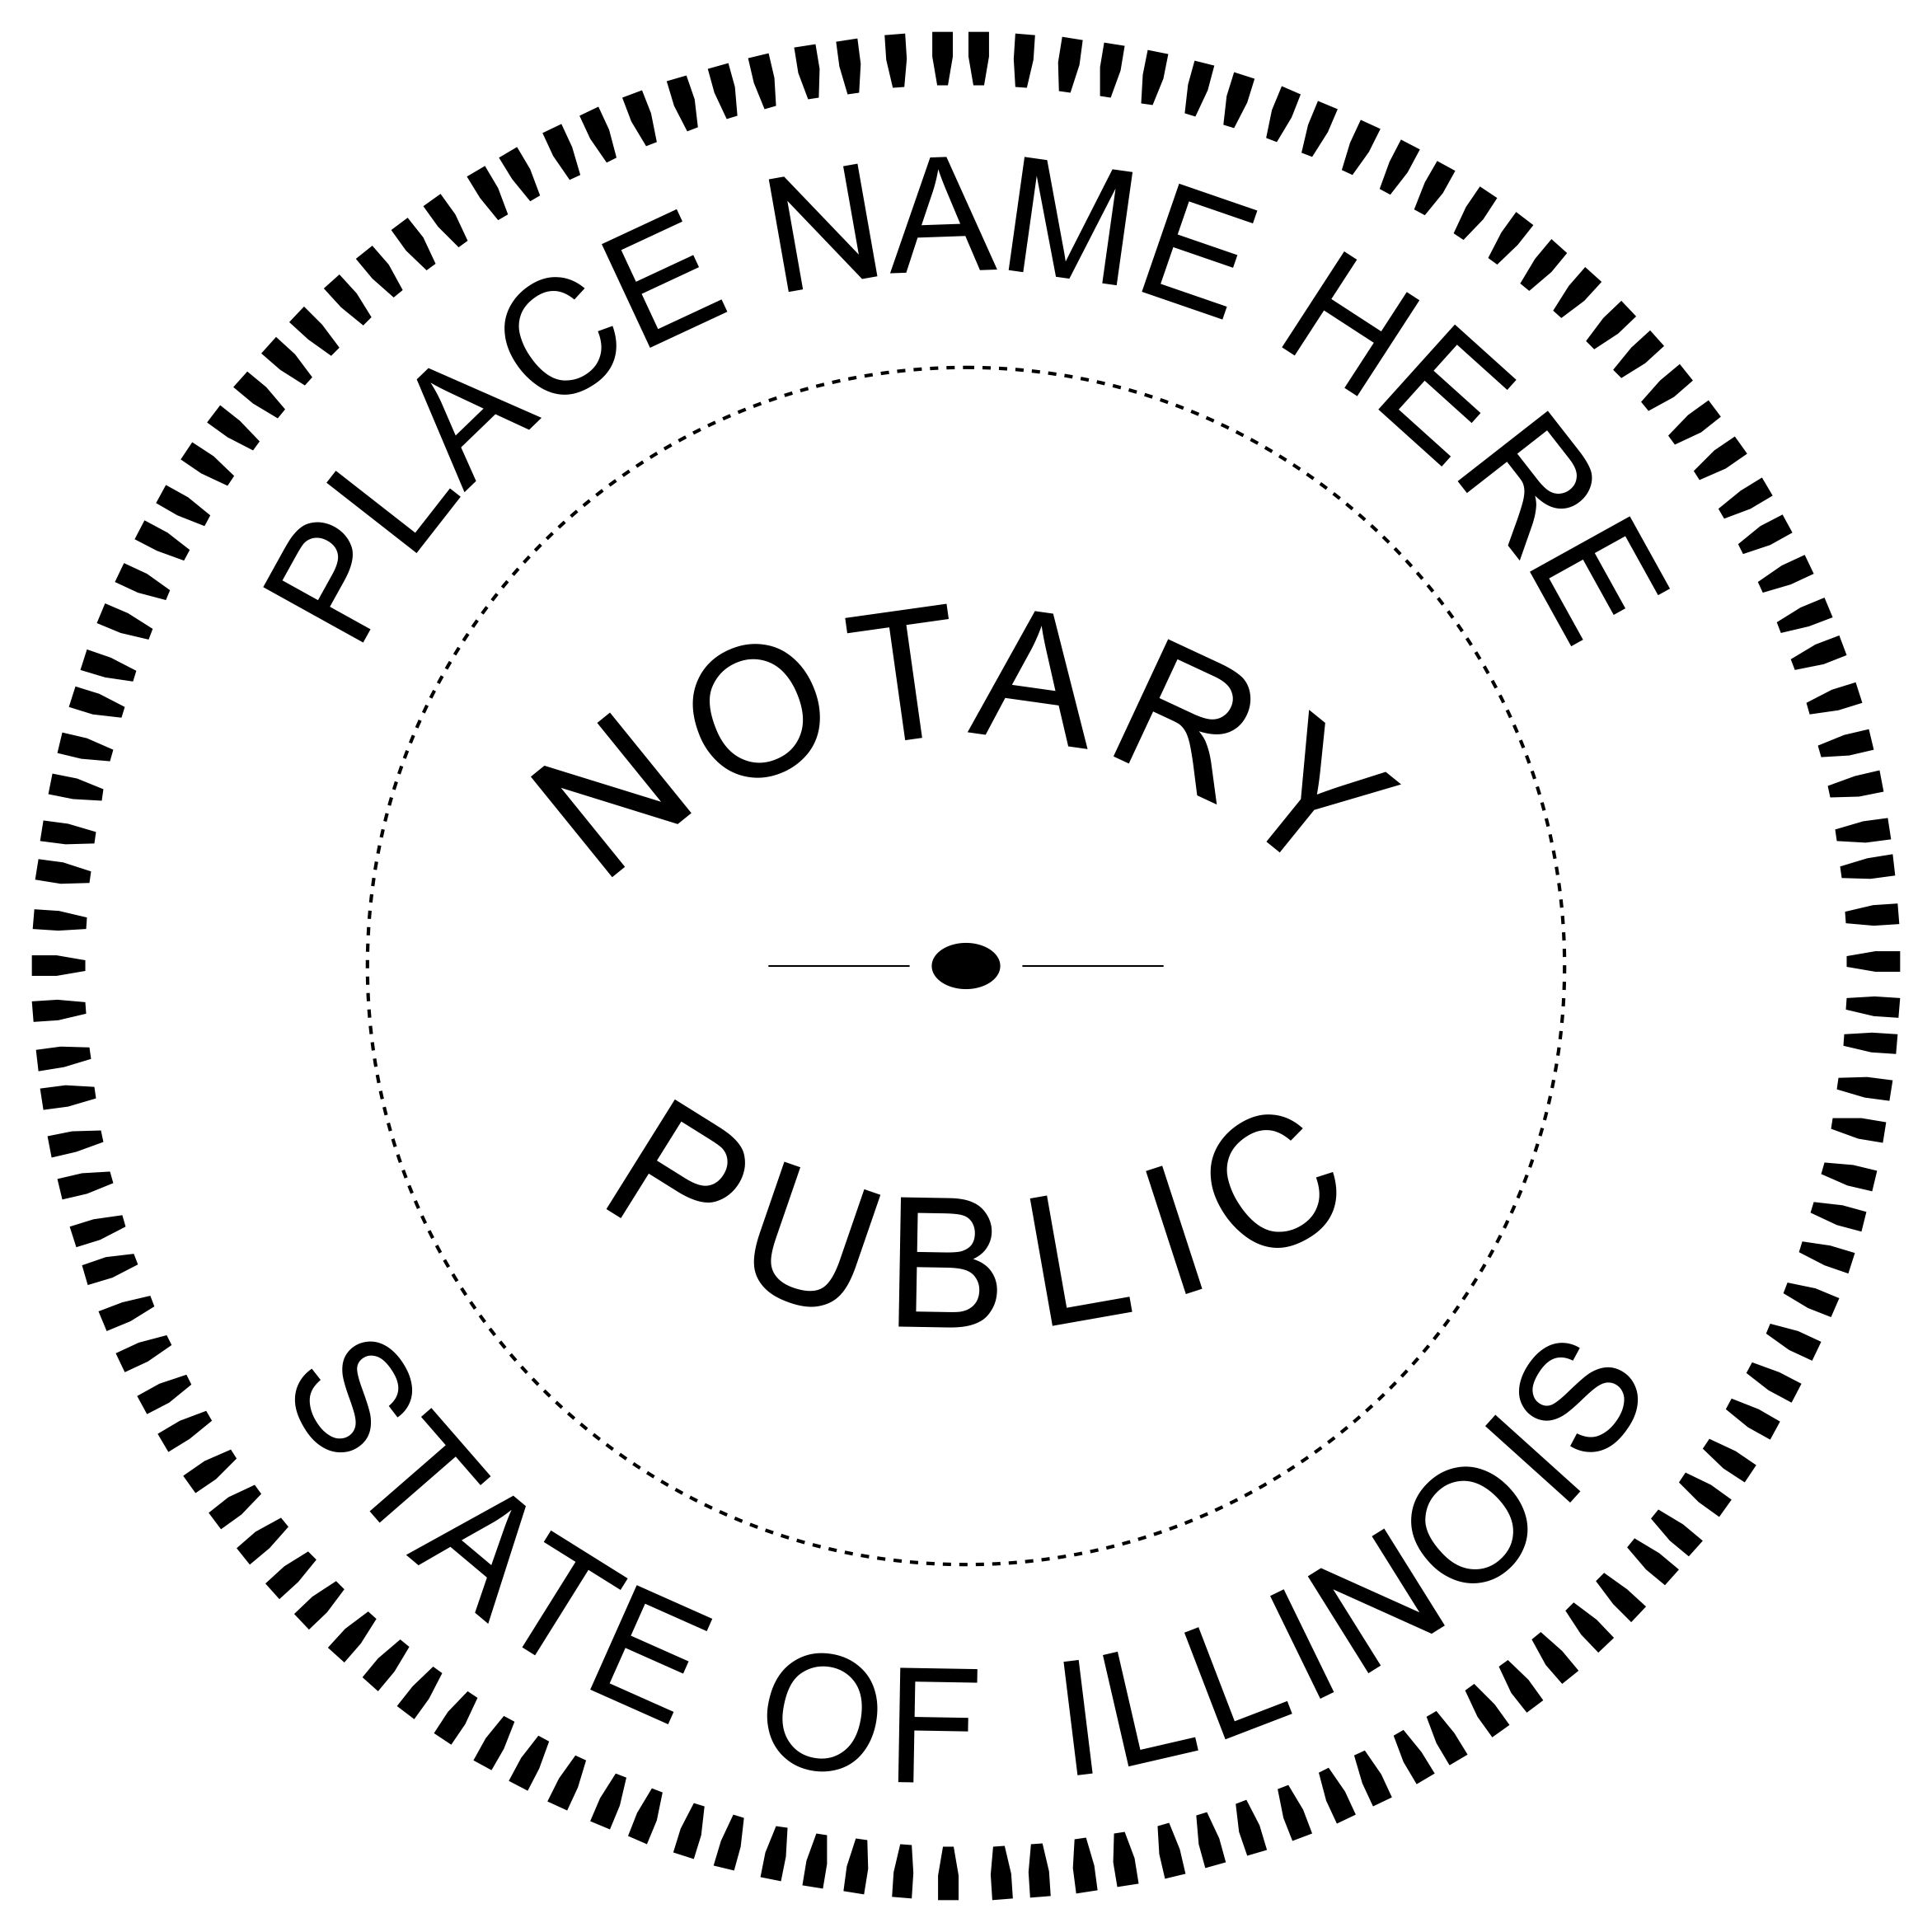 Illinois Made Stamp - Leather Stamp Maker